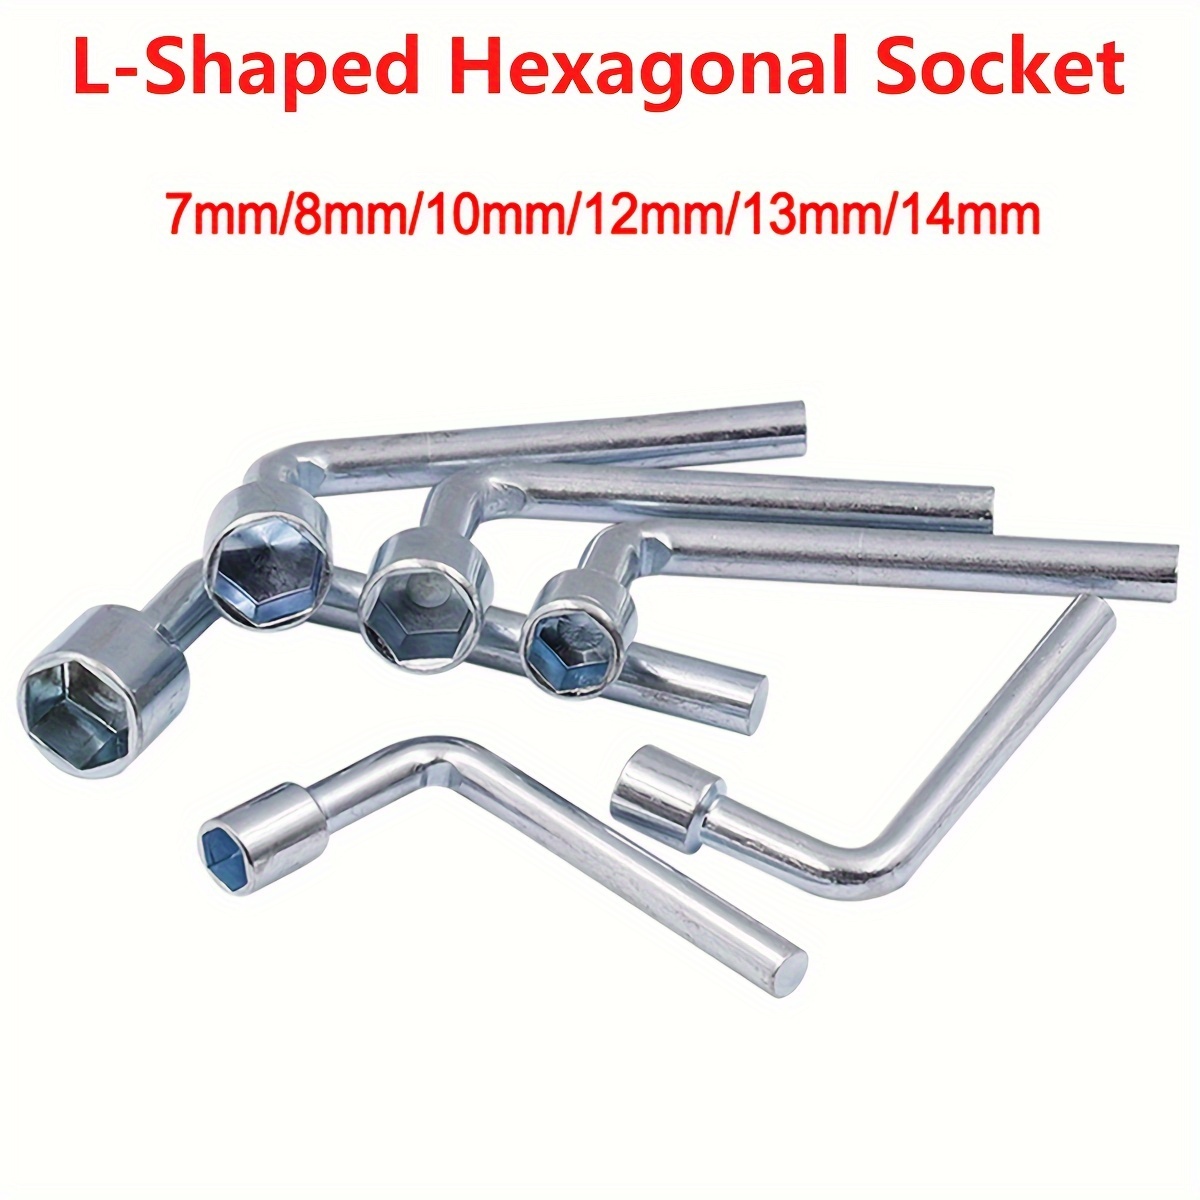 7/8/10/12/13/14mm L-shaped Socket Wrench Hexagonal Wrench Multi Triangle Wrench Mini Socket Wrench Hand Maintenance Tool